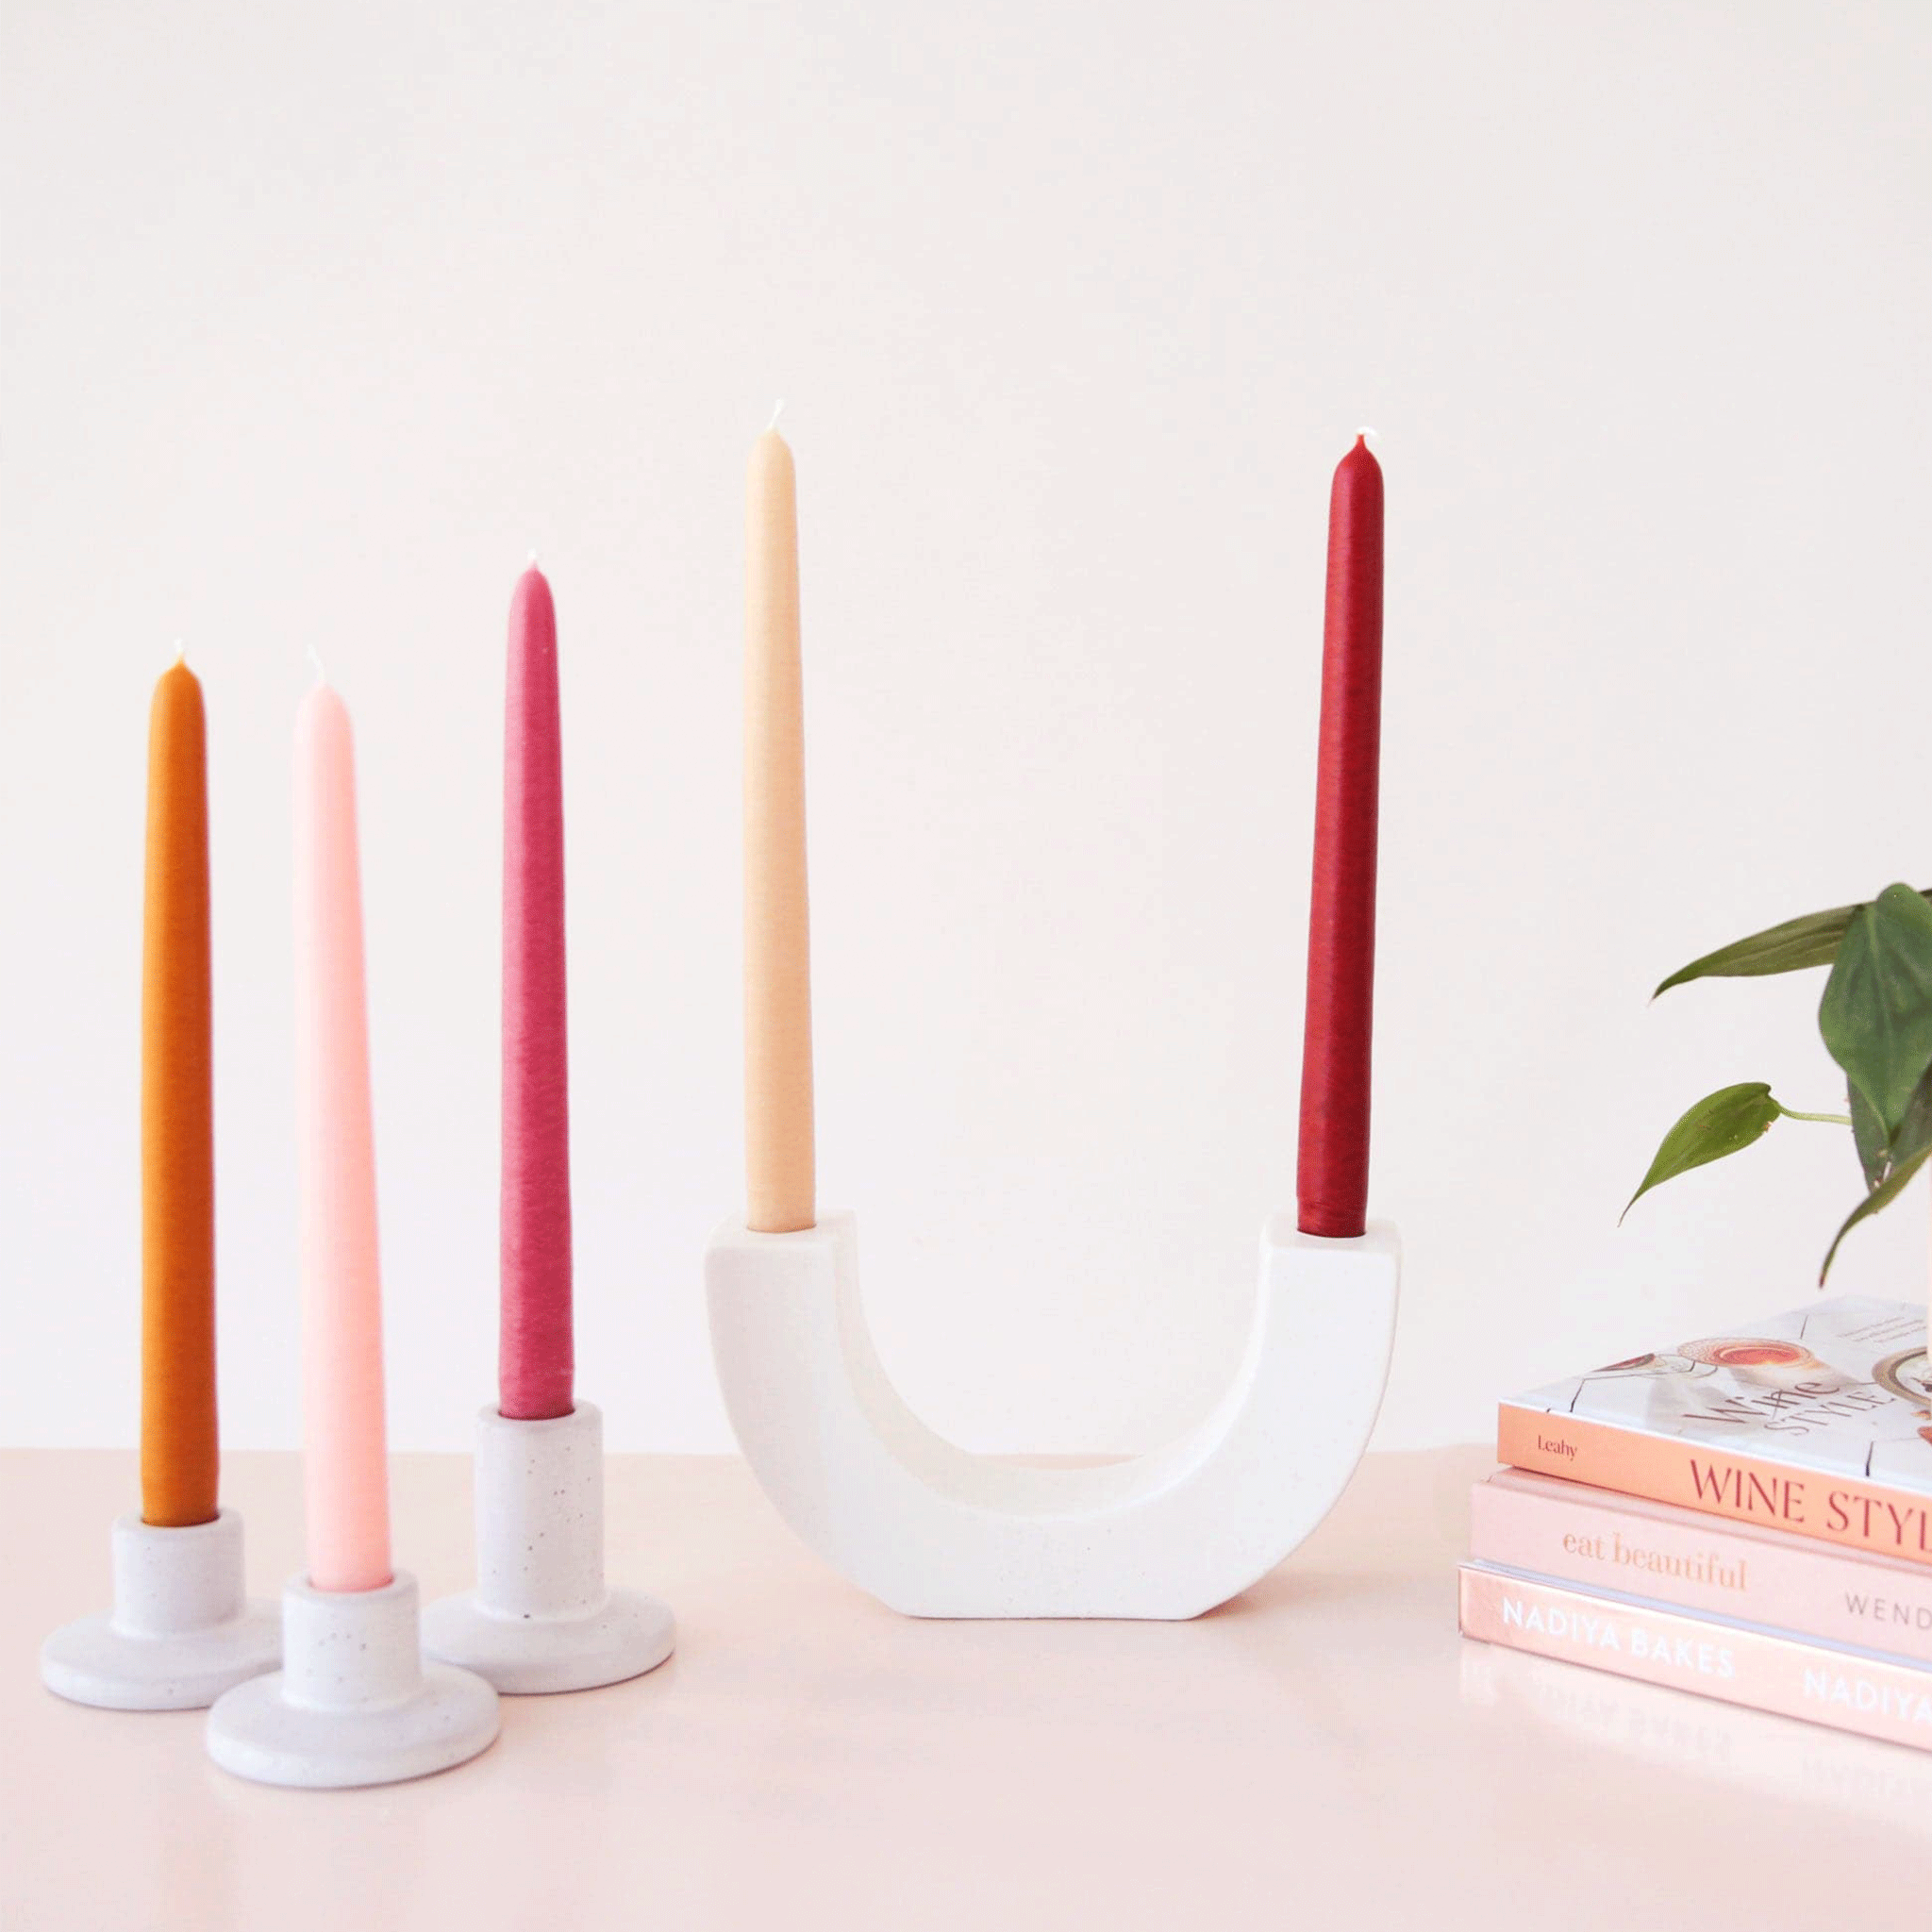 A set of five taper candles in warm shades of pink, orange and reds along photographed here in a U-shaped taper candle holder and individual ceramic ones on a table scape with books and a plant.